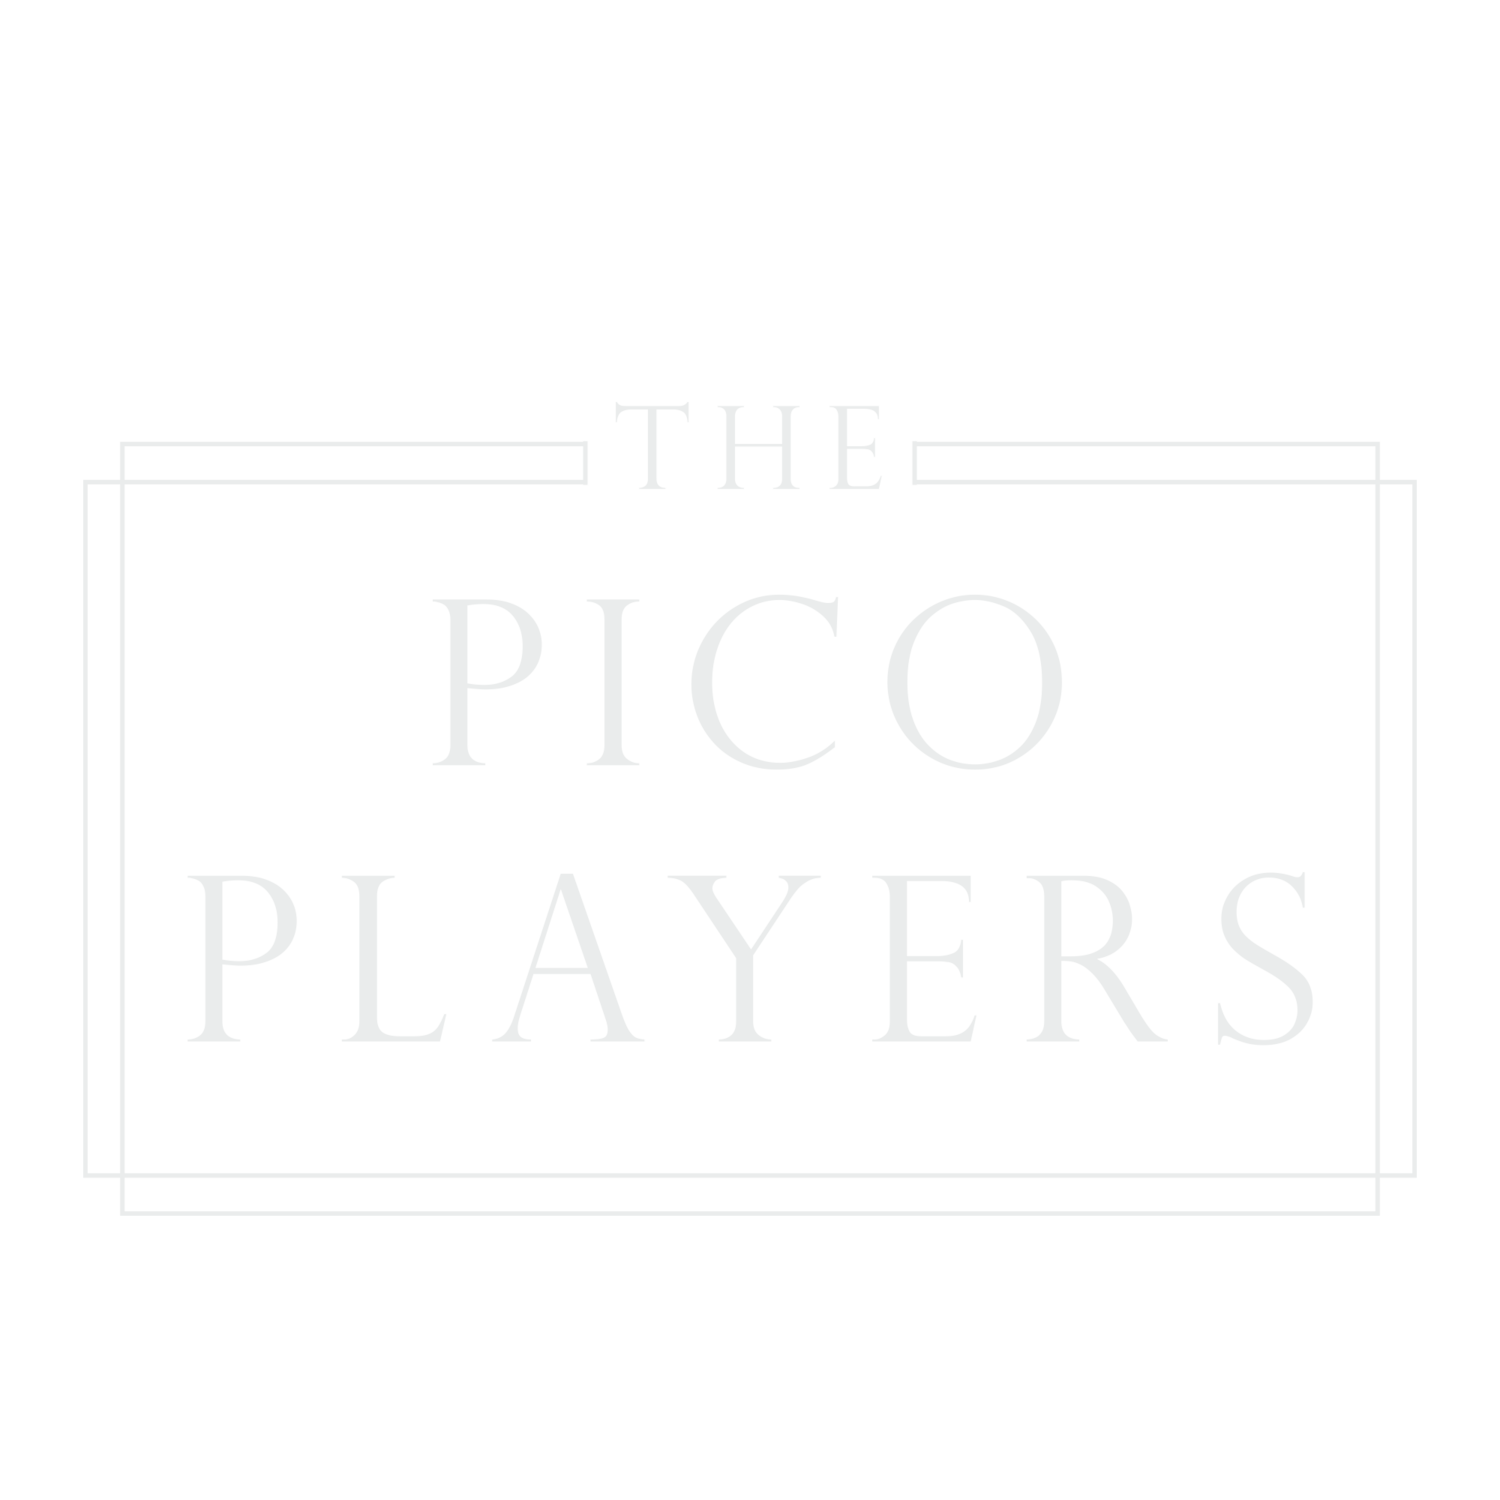 The Pico Players